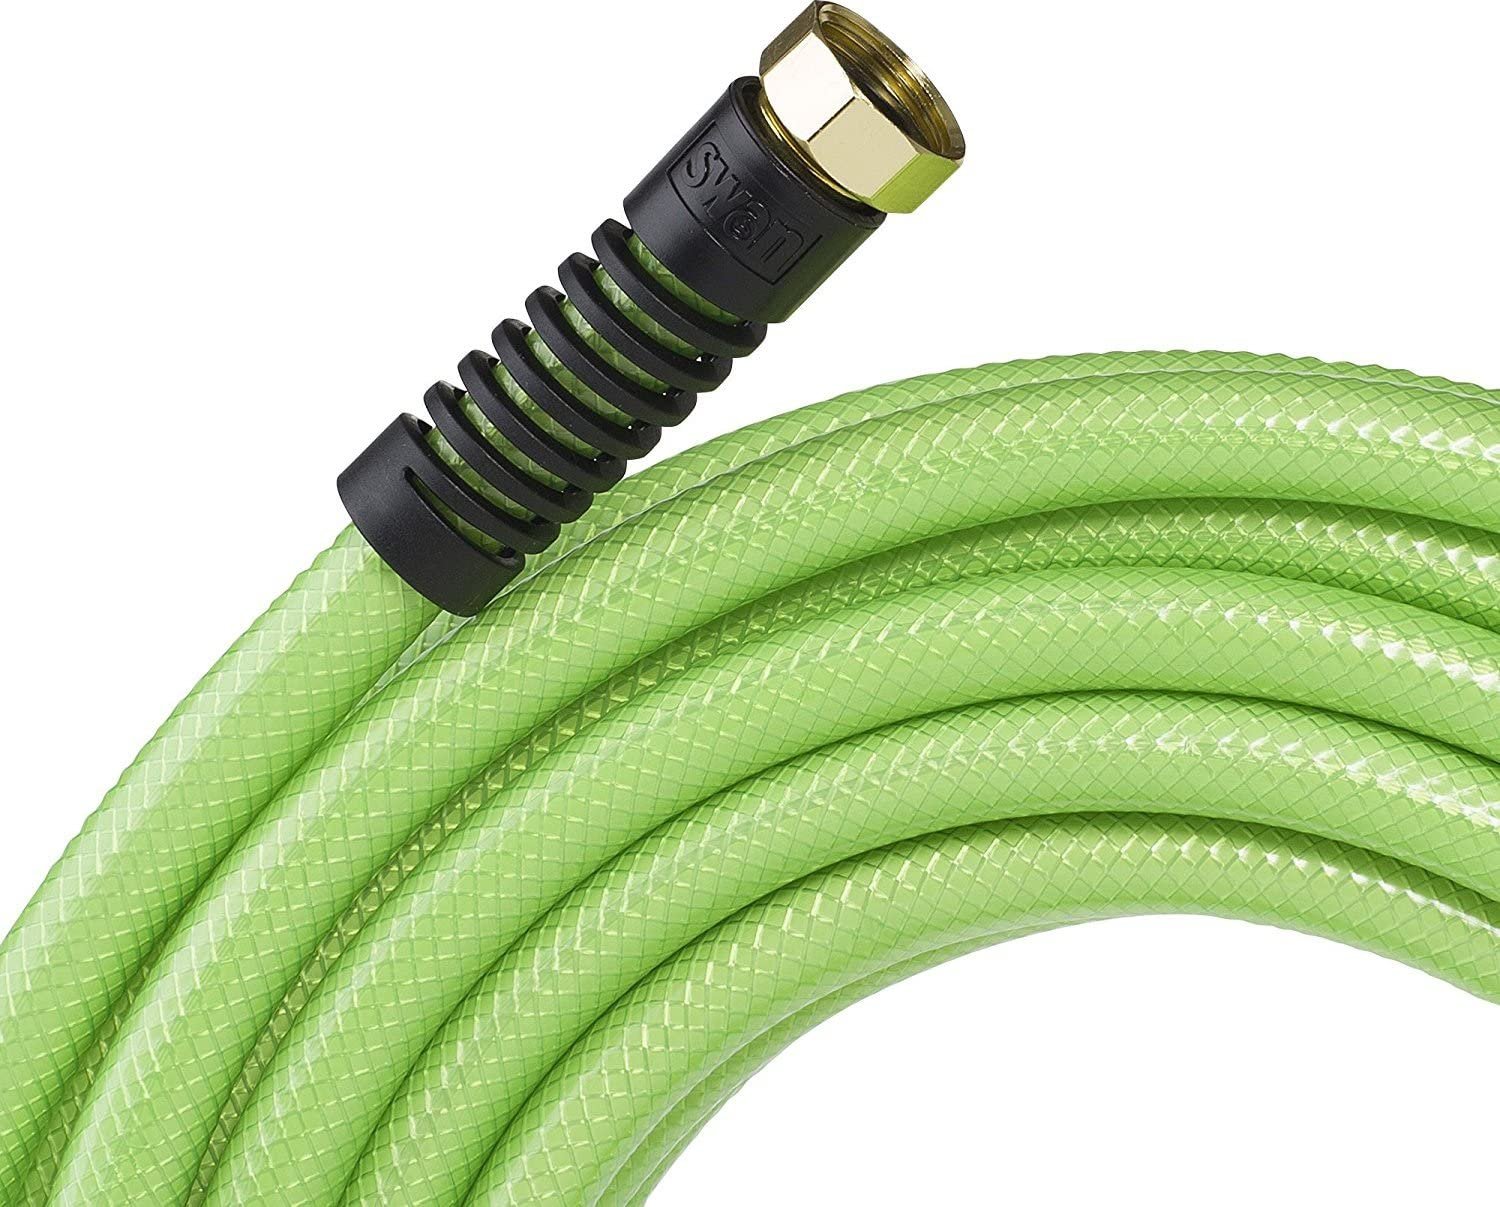 Swan Products ELGG58050 Element Green & Grow Lead Free Gardening Hose 50' x 5/8", Green - image 4 of 7